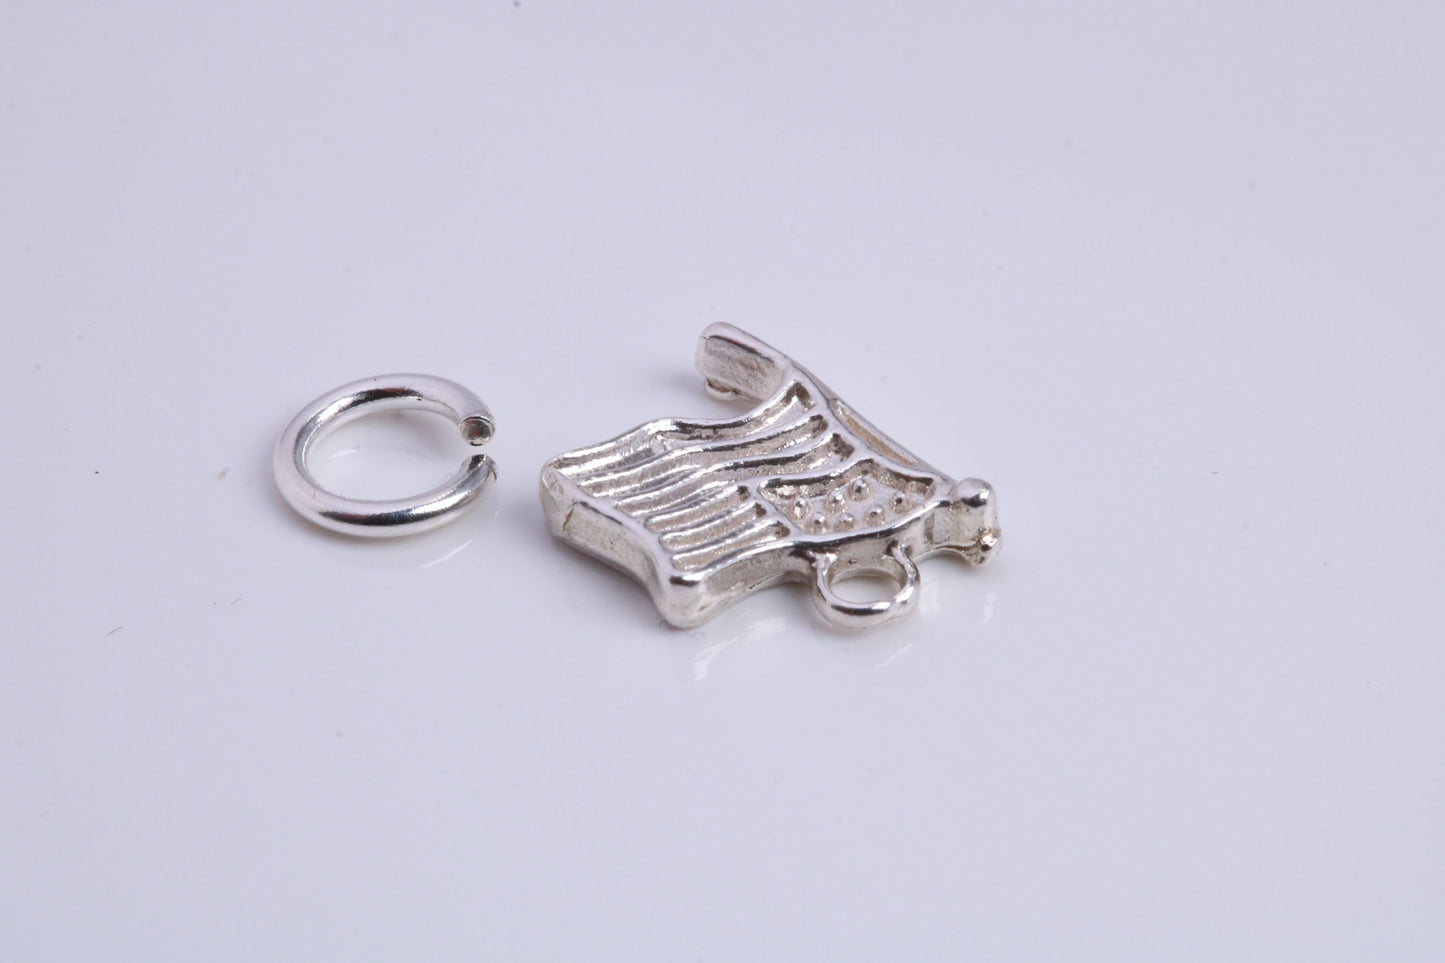 USA Flag Charm, Traditional Charm, Made from Solid 925 Grade Sterling Silver, Complete with Attachment Link